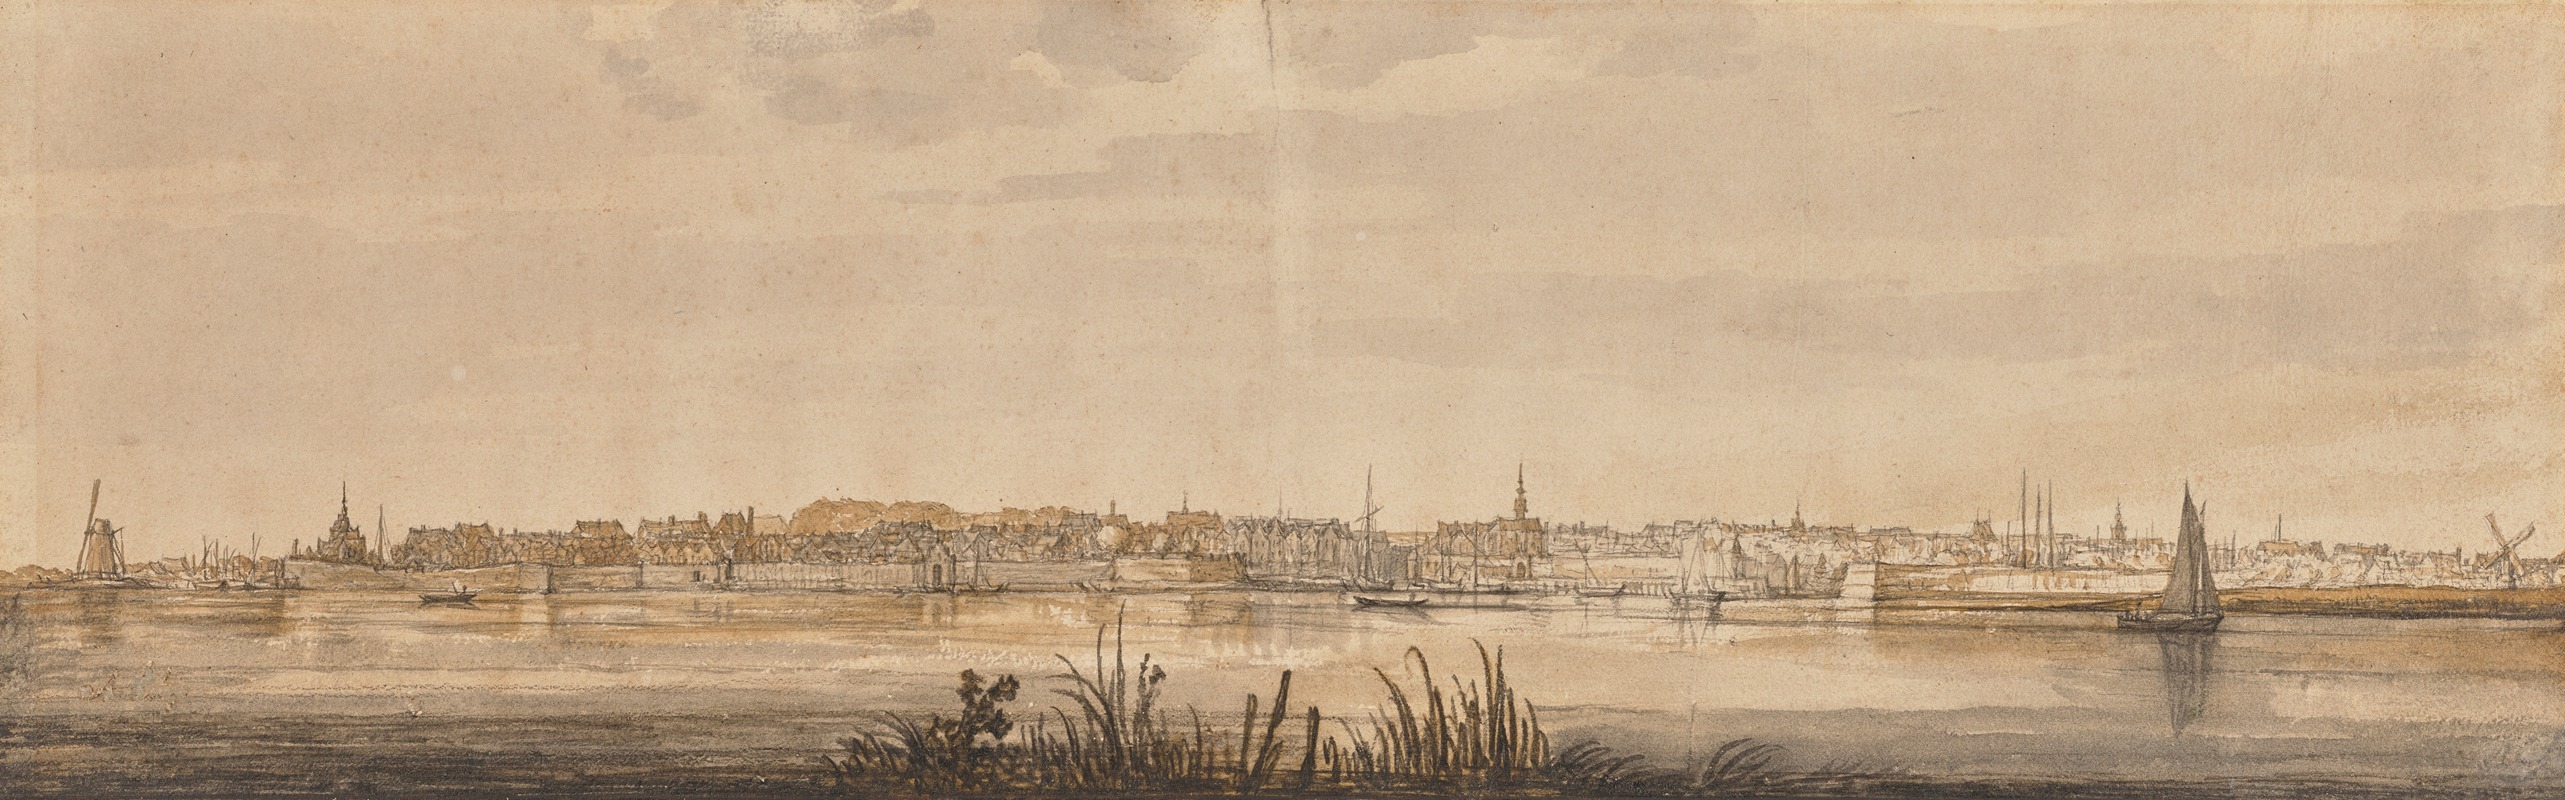 Aelbert Cuyp - Panoramic View of Dordrecht and the River Maas